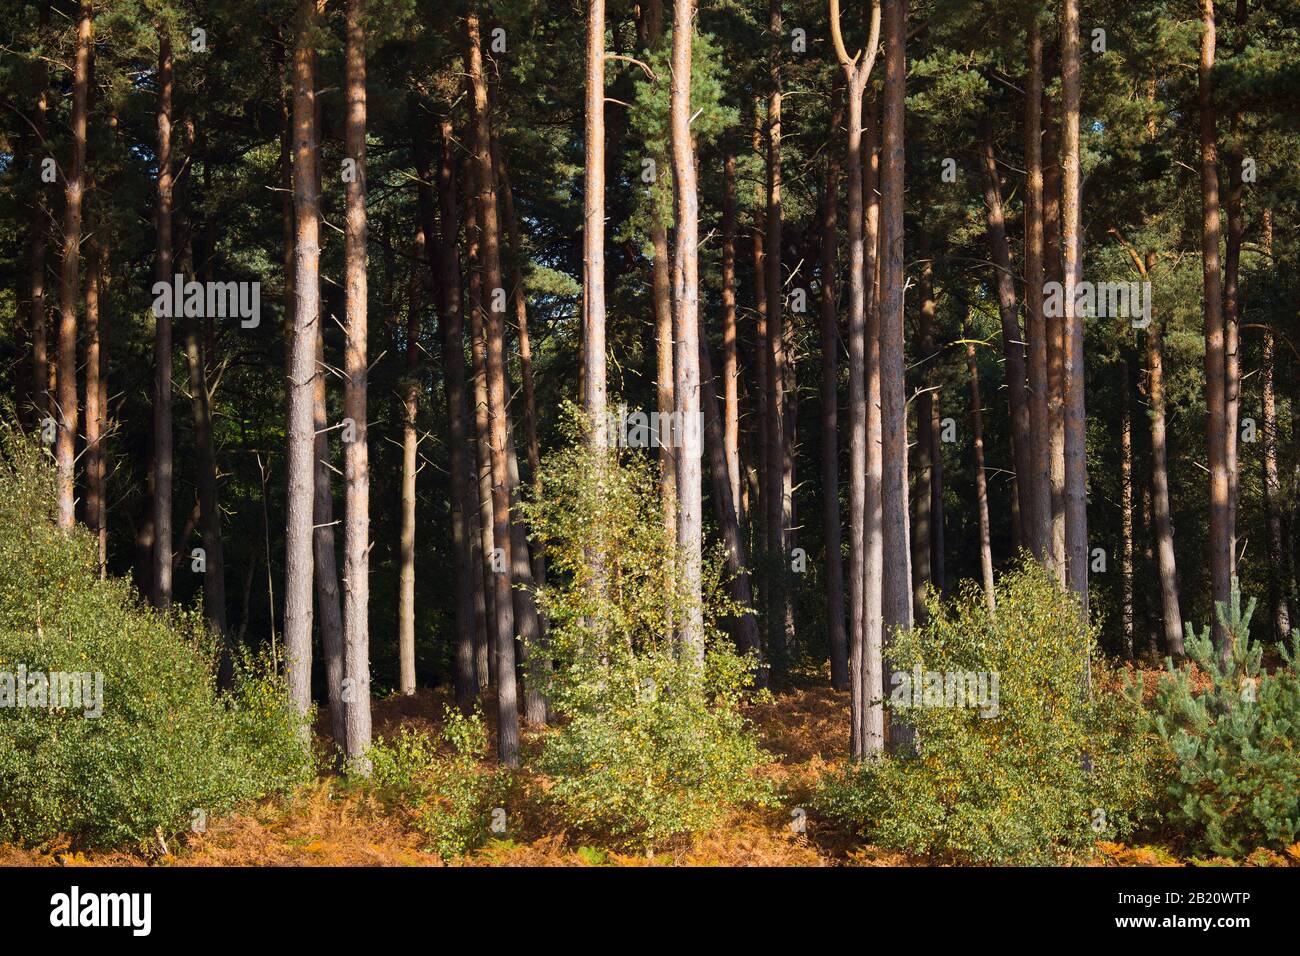 Dense pine forest with young birch trees in the foreground Stock Photo